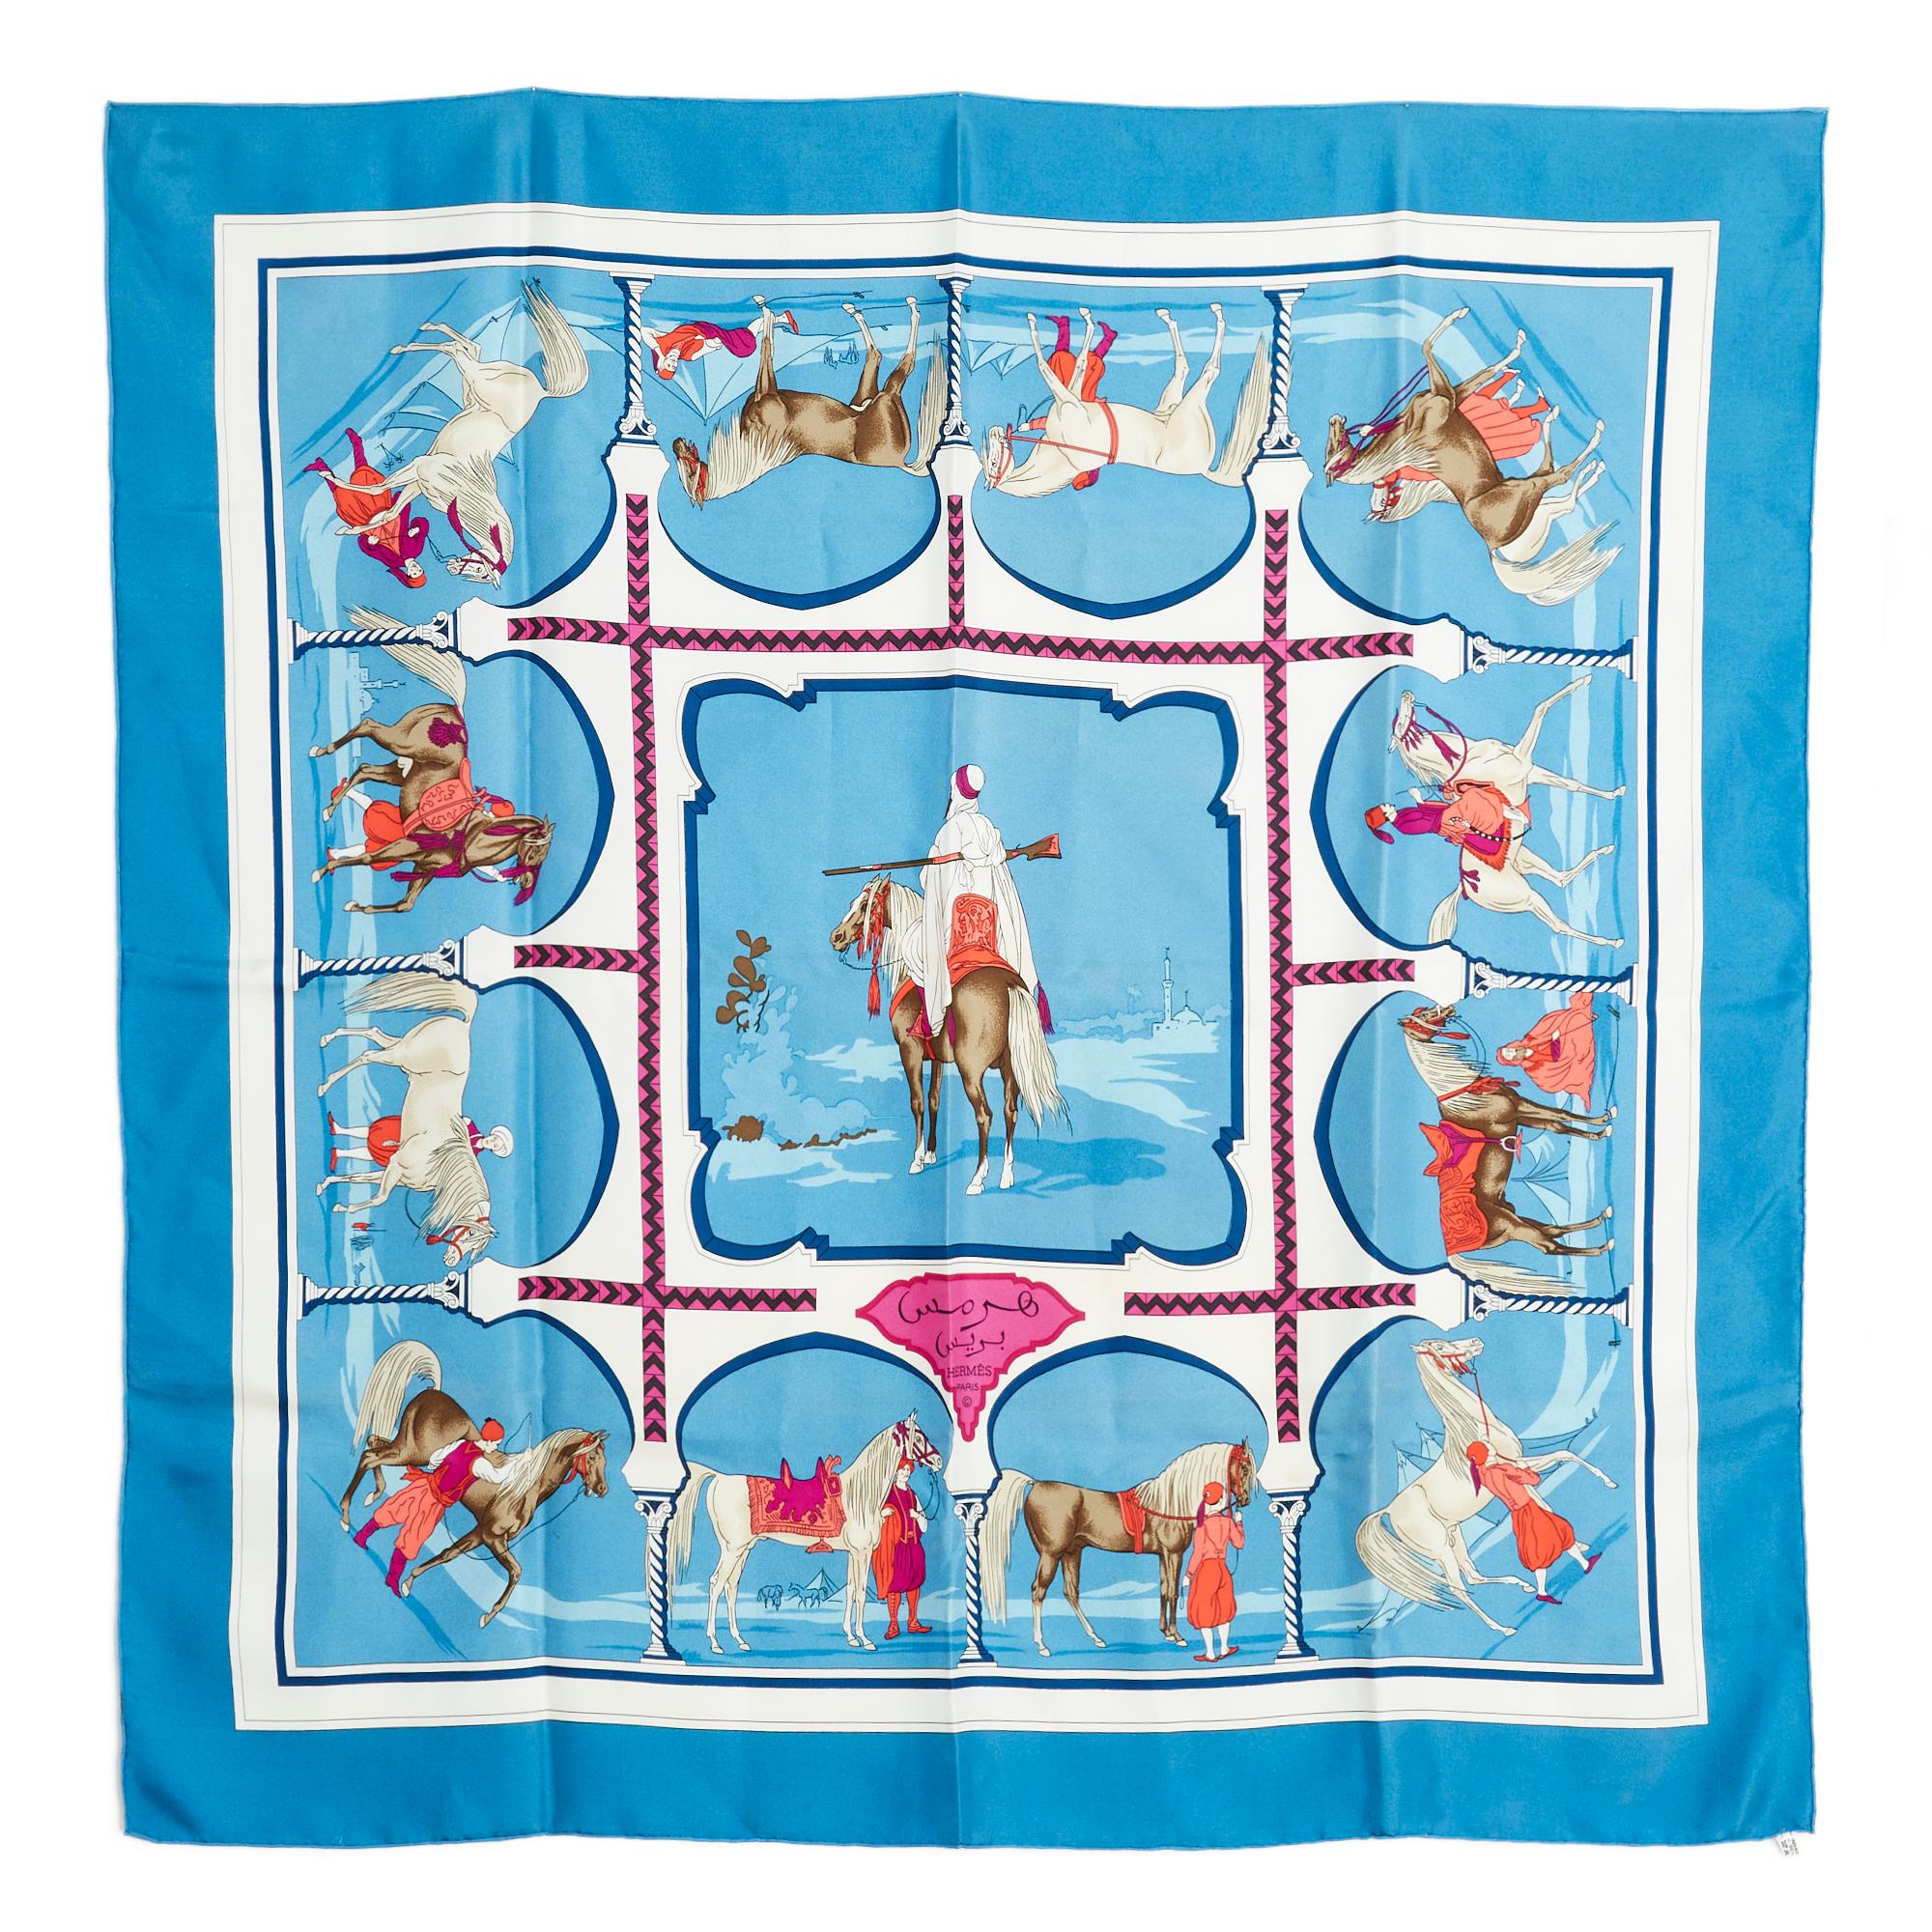 Hermès square 90 scarf in silk twill, Perspective pattern by A.M. Cassandre, pale blue tones. Width 90 cm x length 90 cm approximately. The square is vintage and it probably shows some traces of use and it has a small pen mark but it remains in very